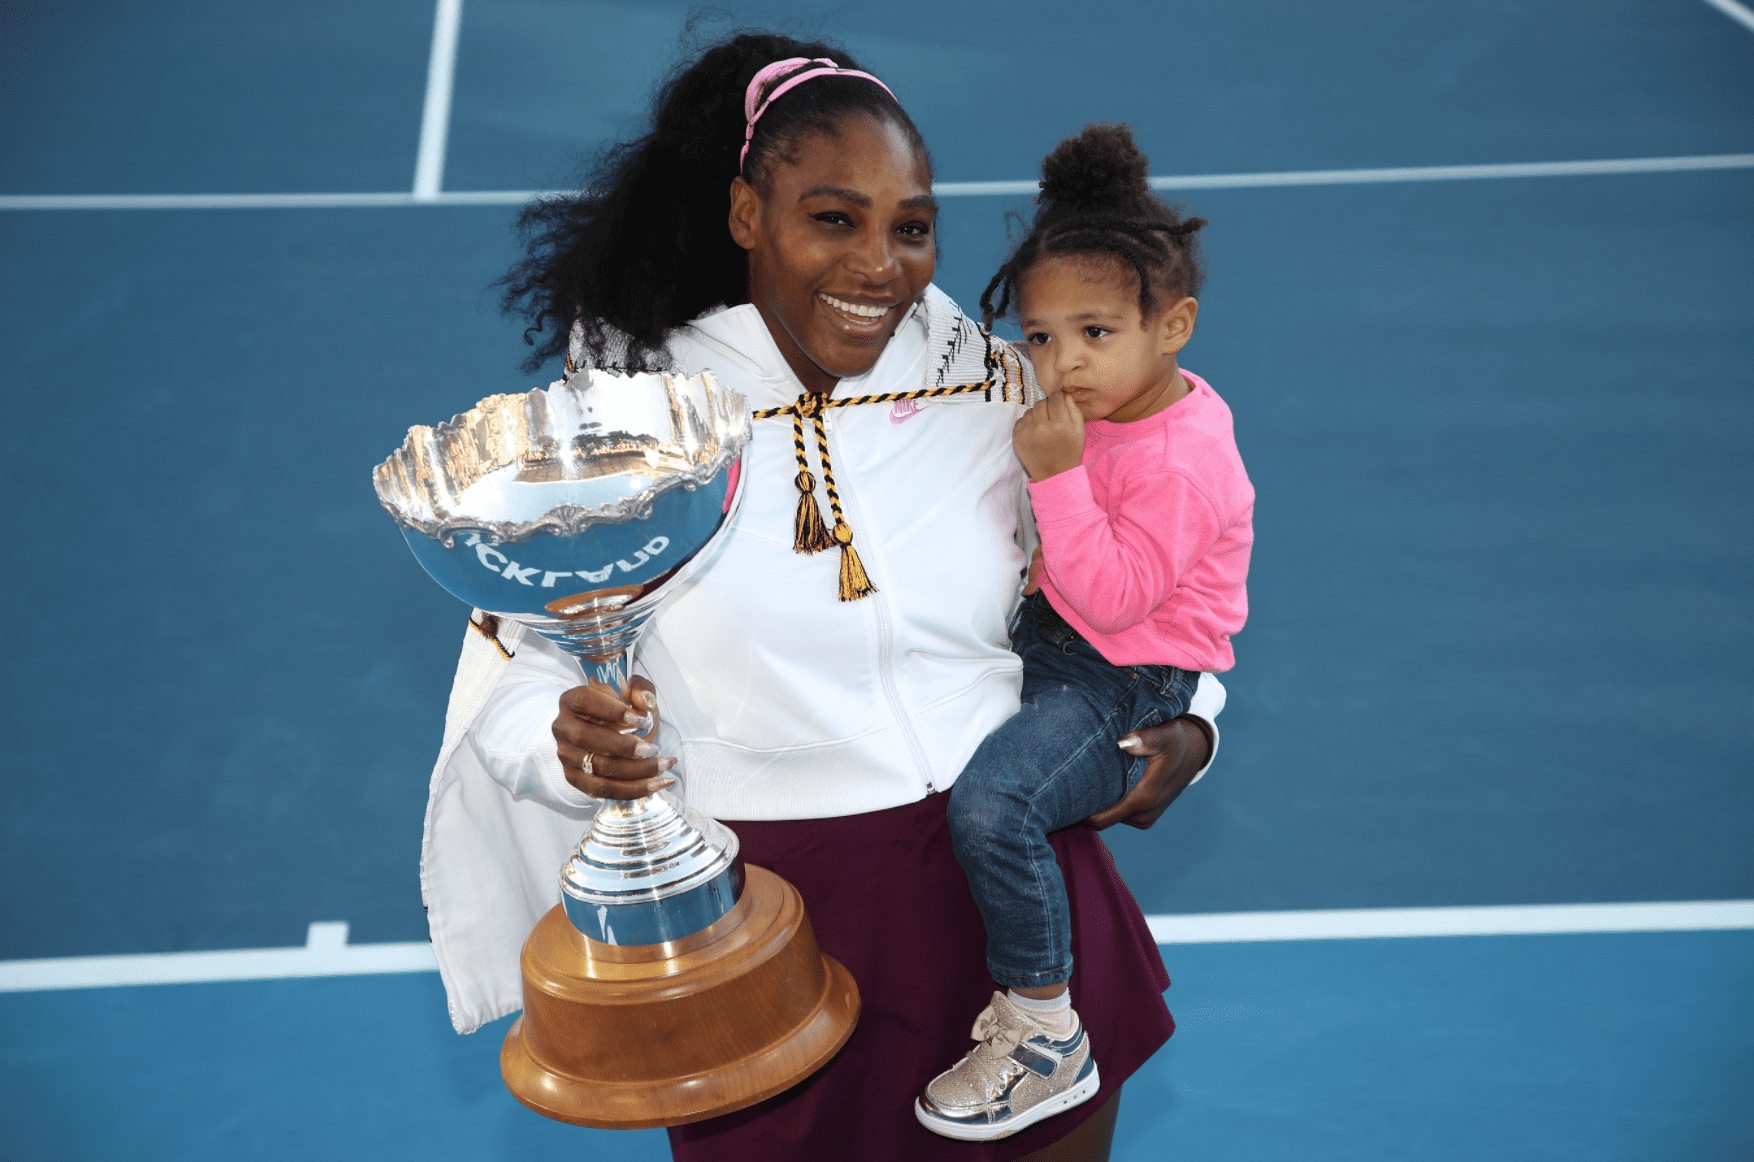 Serena Williams and her daughter Alexis Olympia at ASB Tennis Centre, 2020 in New Zealand. | Source: Getty Images